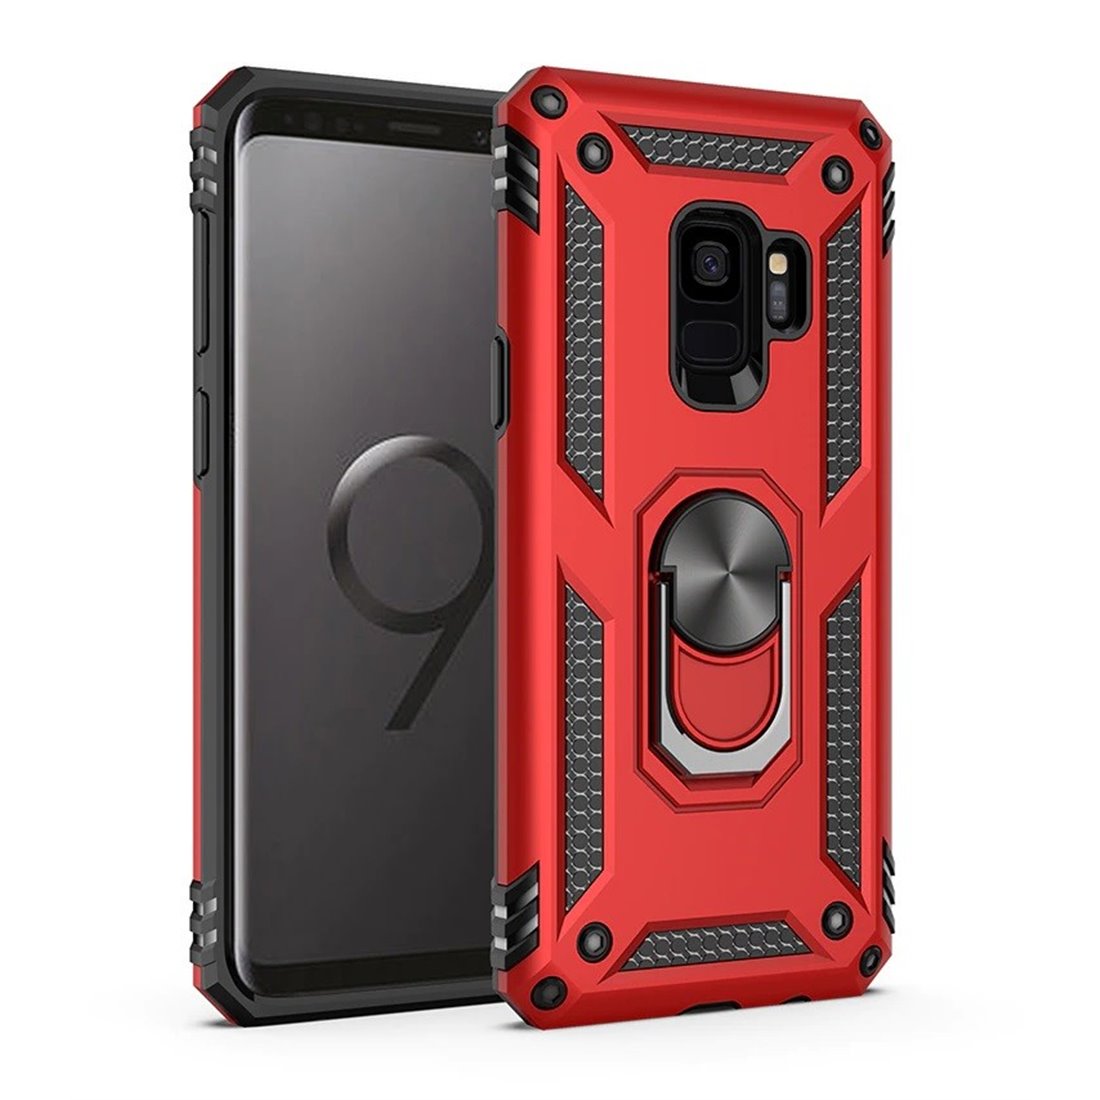 Samsung Galaxy S9 plus Plastic Red Back Cover - Solid ring